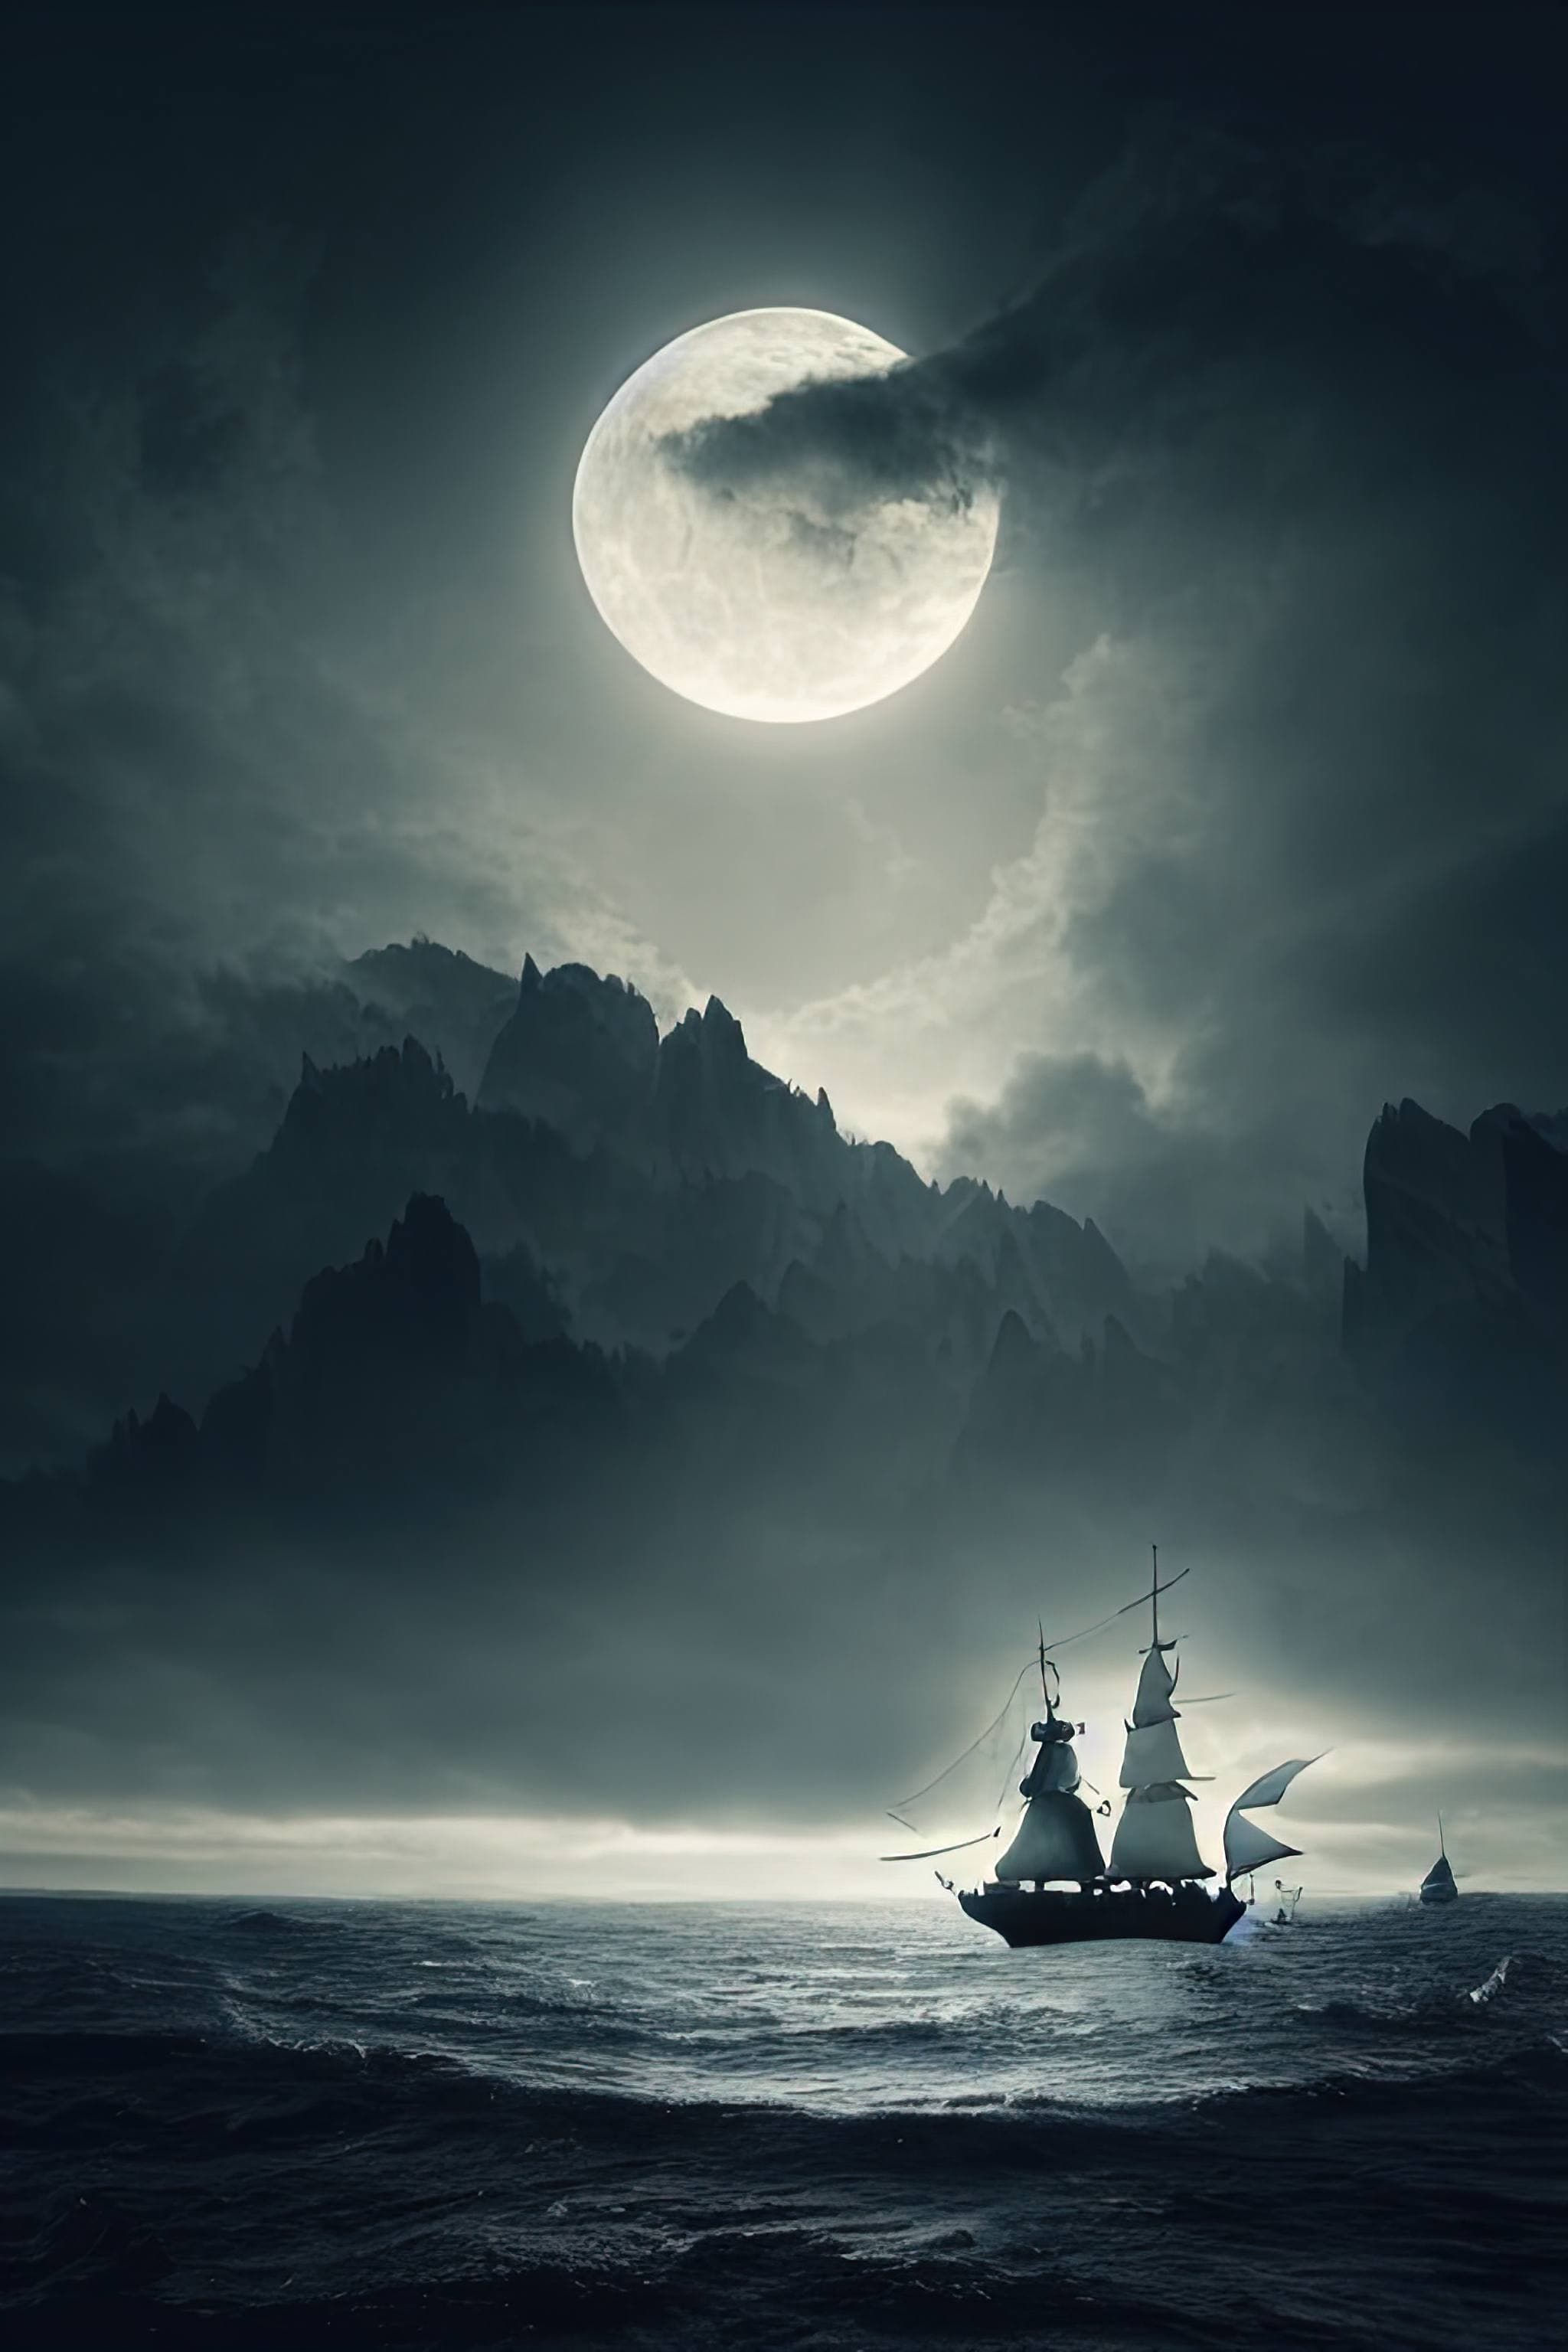 A pirate ship in the water with a moon in the background